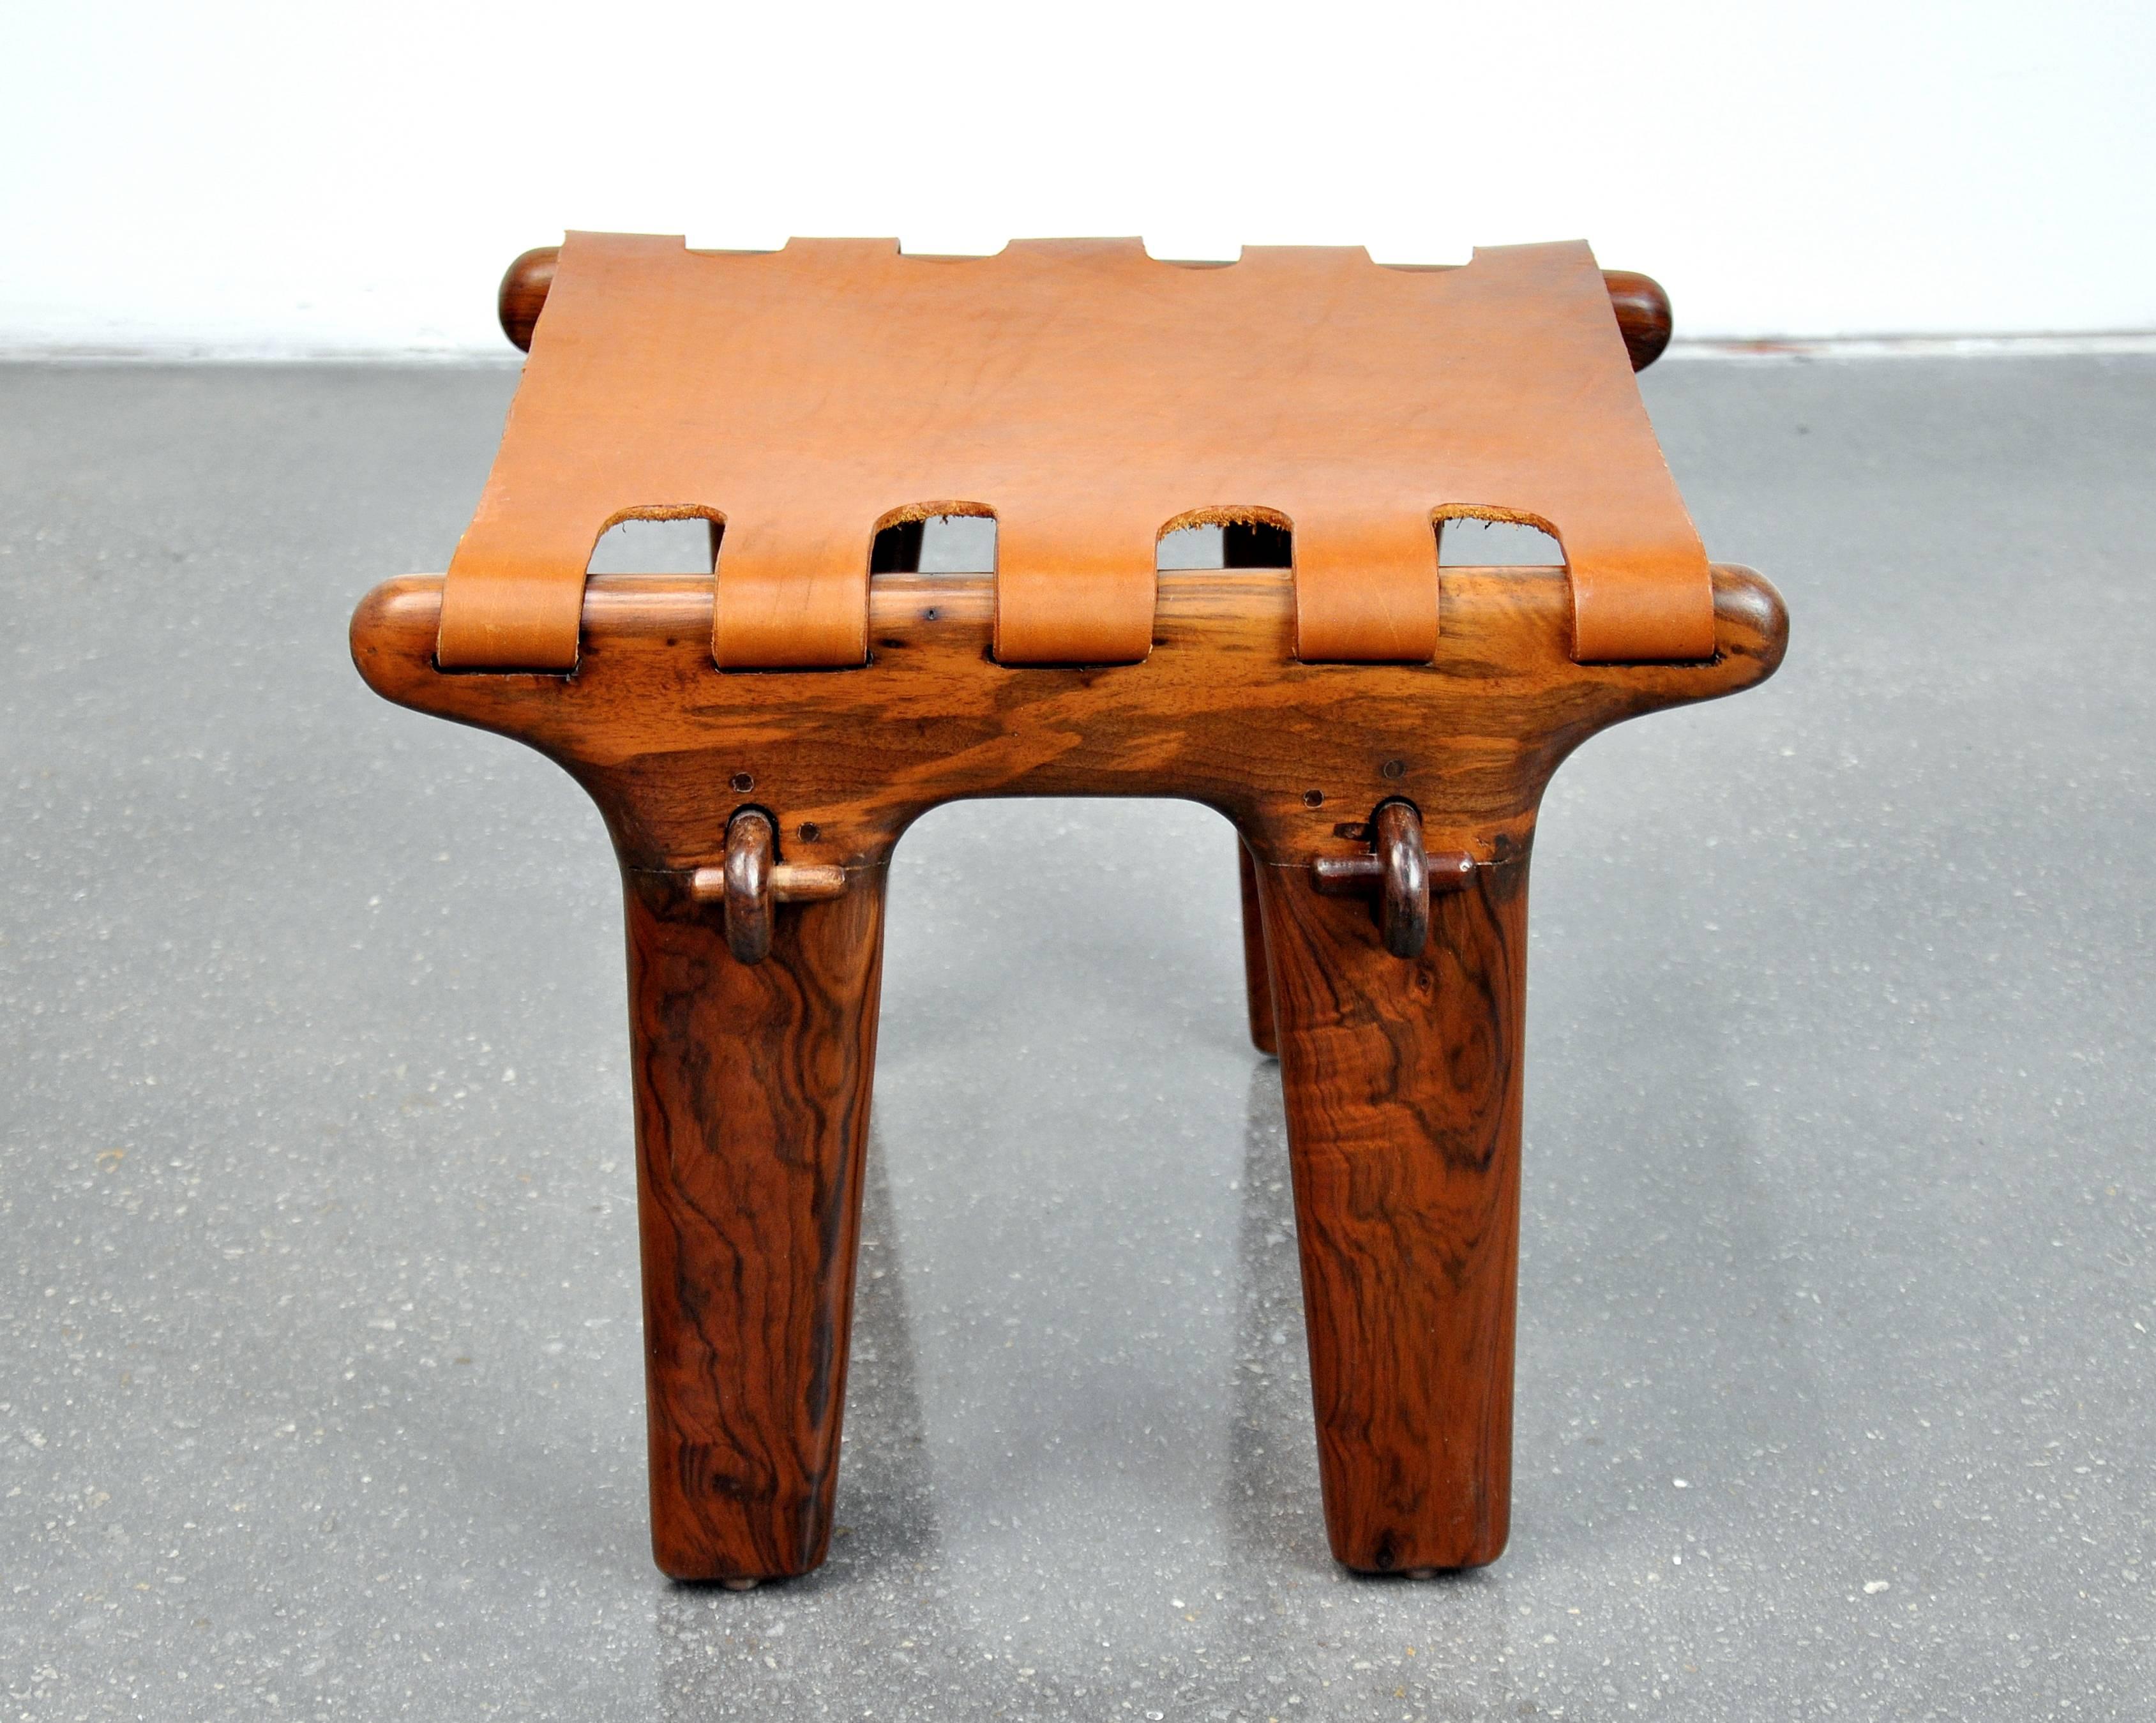 Amazing midcentury safari style footstool by Ecuadorian designer Angel Pazmino. The sculptural rosewood frame is slung with newer caramel colored leather and features a wooden peg construction that allows it to be taken apart for easy transport. In